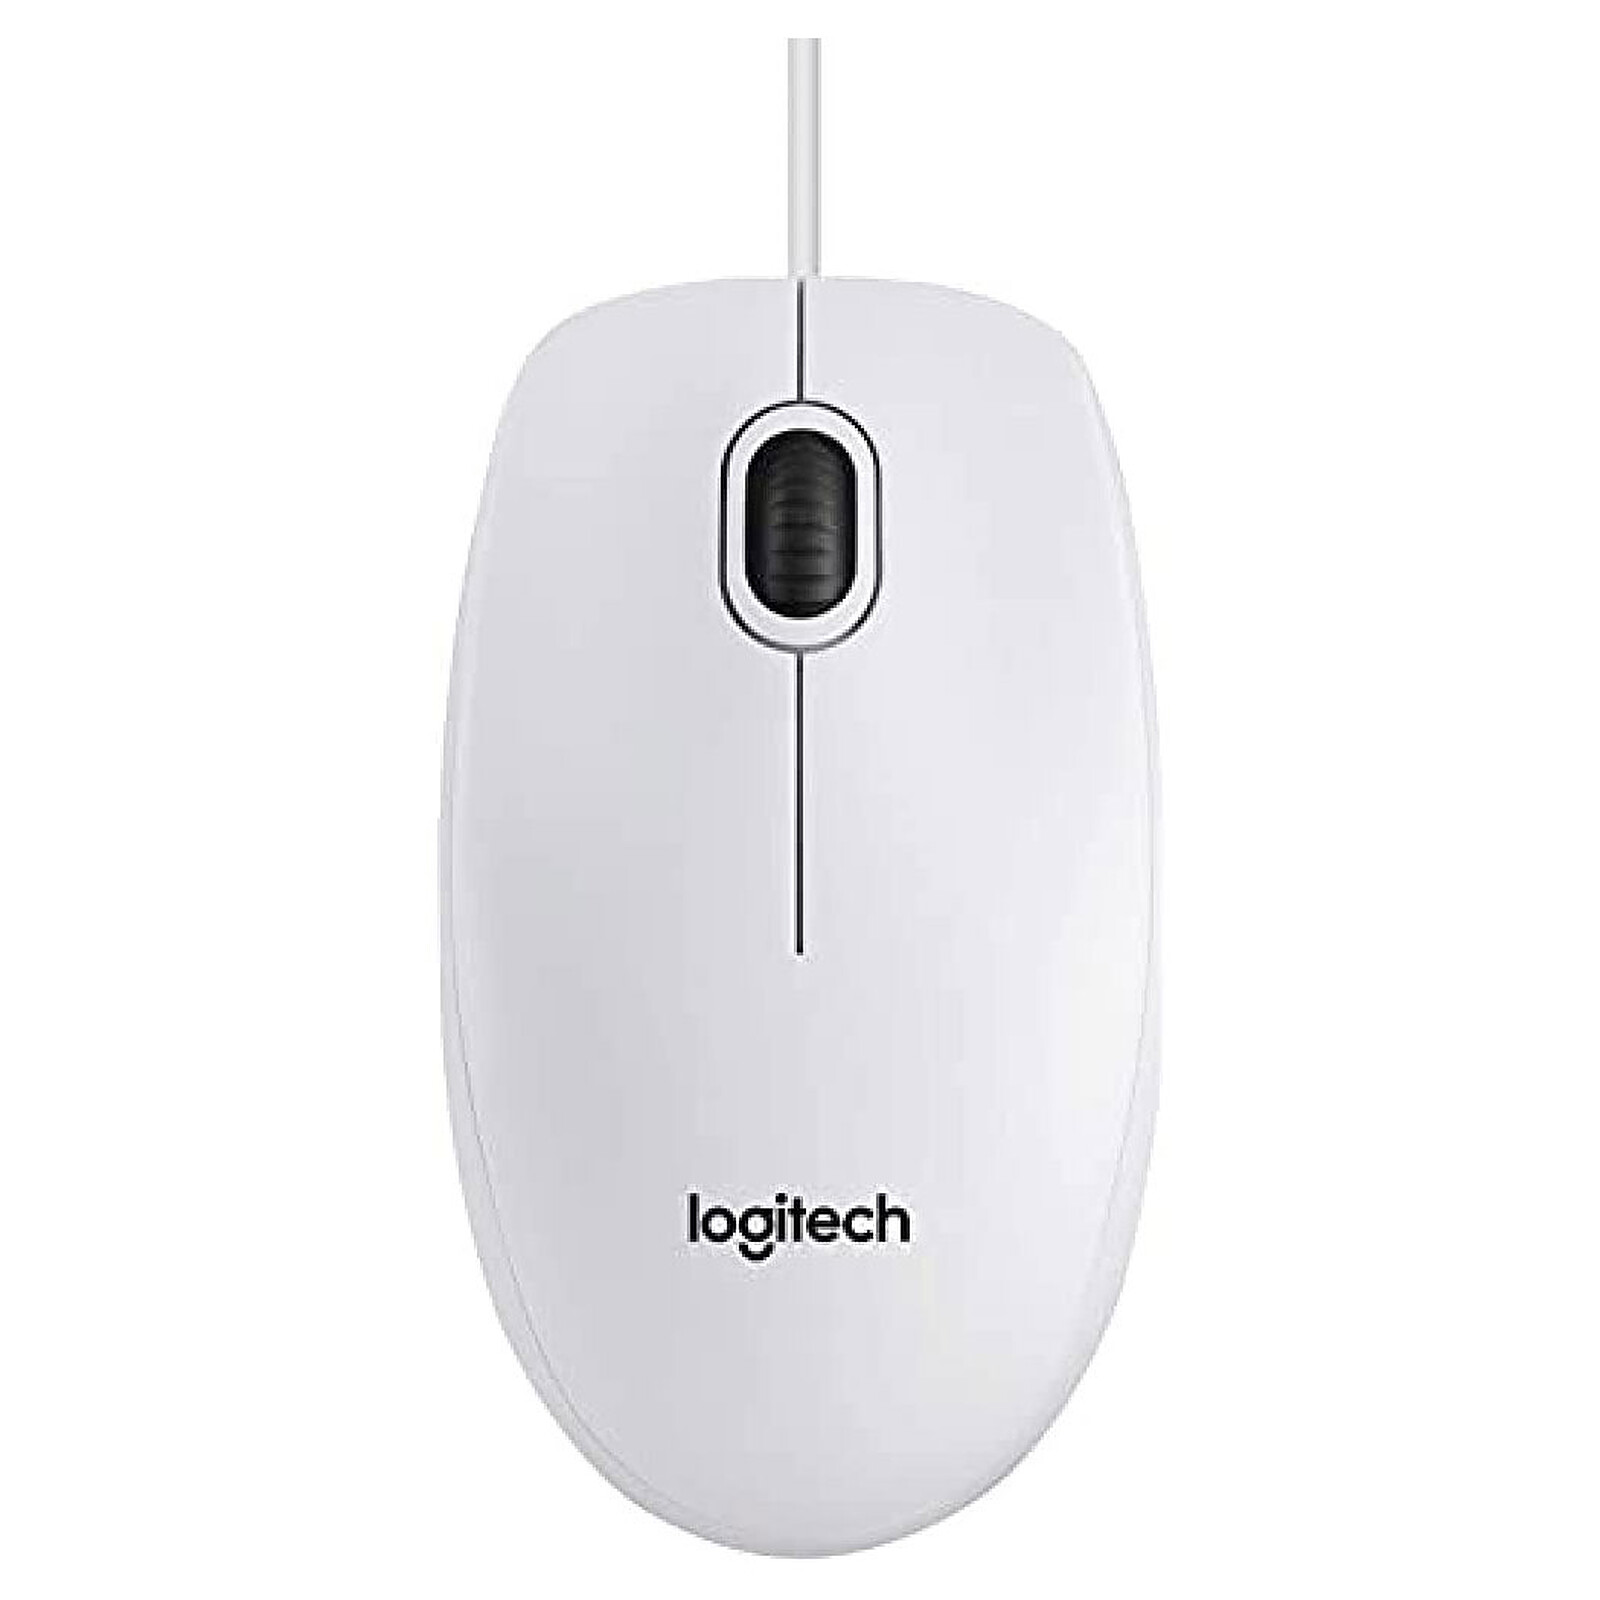 Microsoft Basic Optical Mouse for Business Blanche - Souris PC